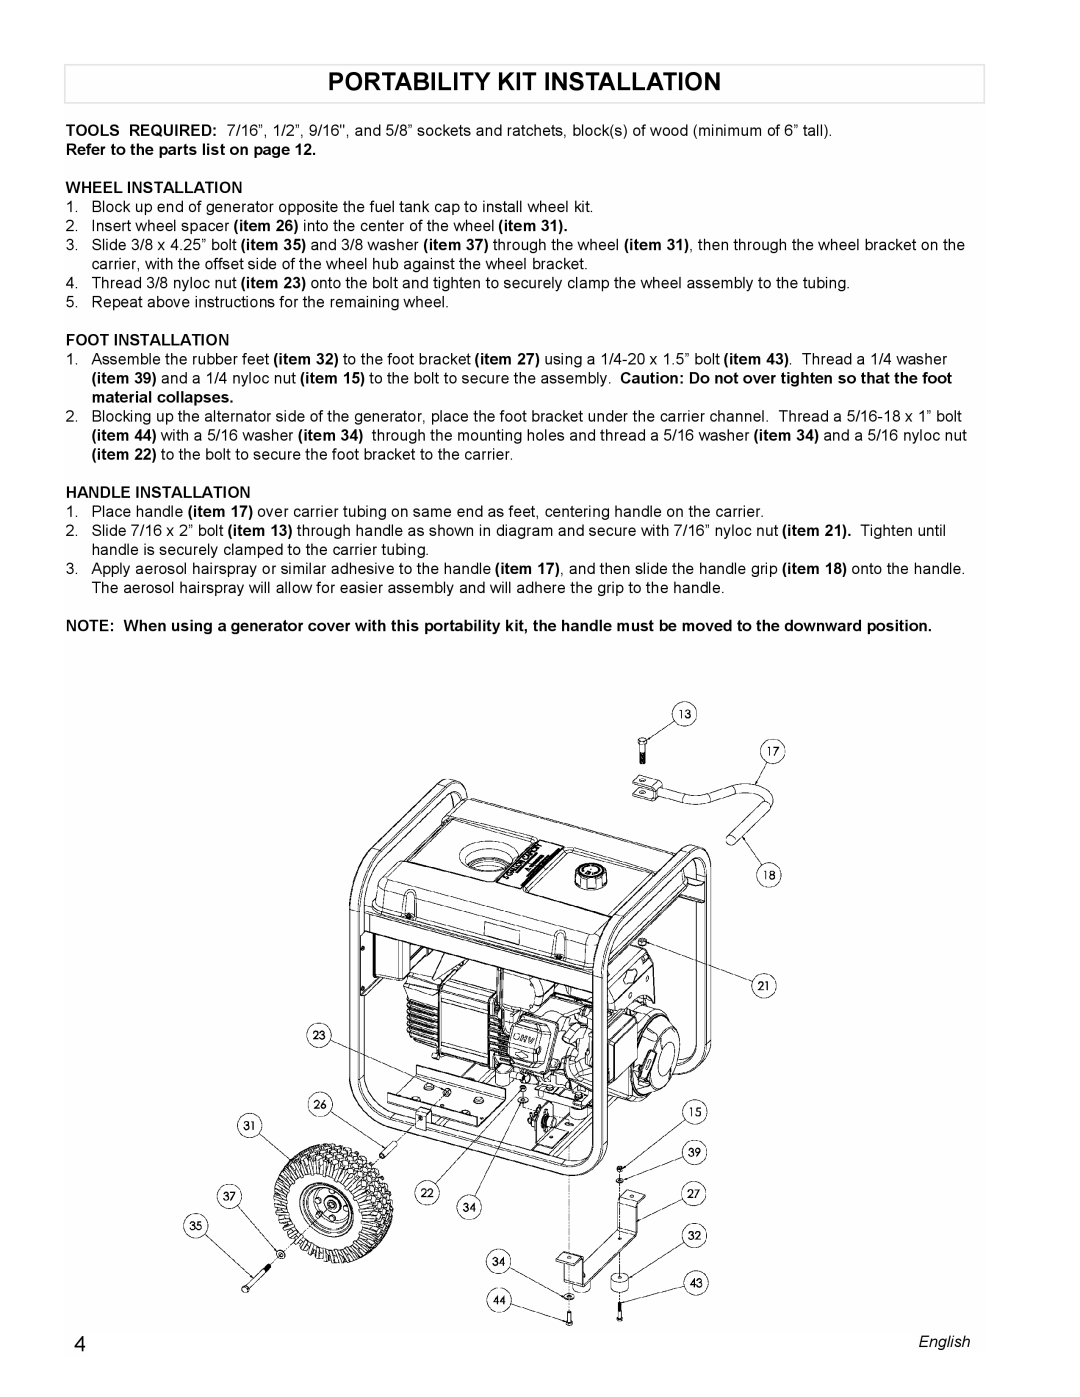 Powermate PM0545001 Portability Kit Installation, Refer to the parts list on page WHEEL INSTALLATION, Foot Installation 